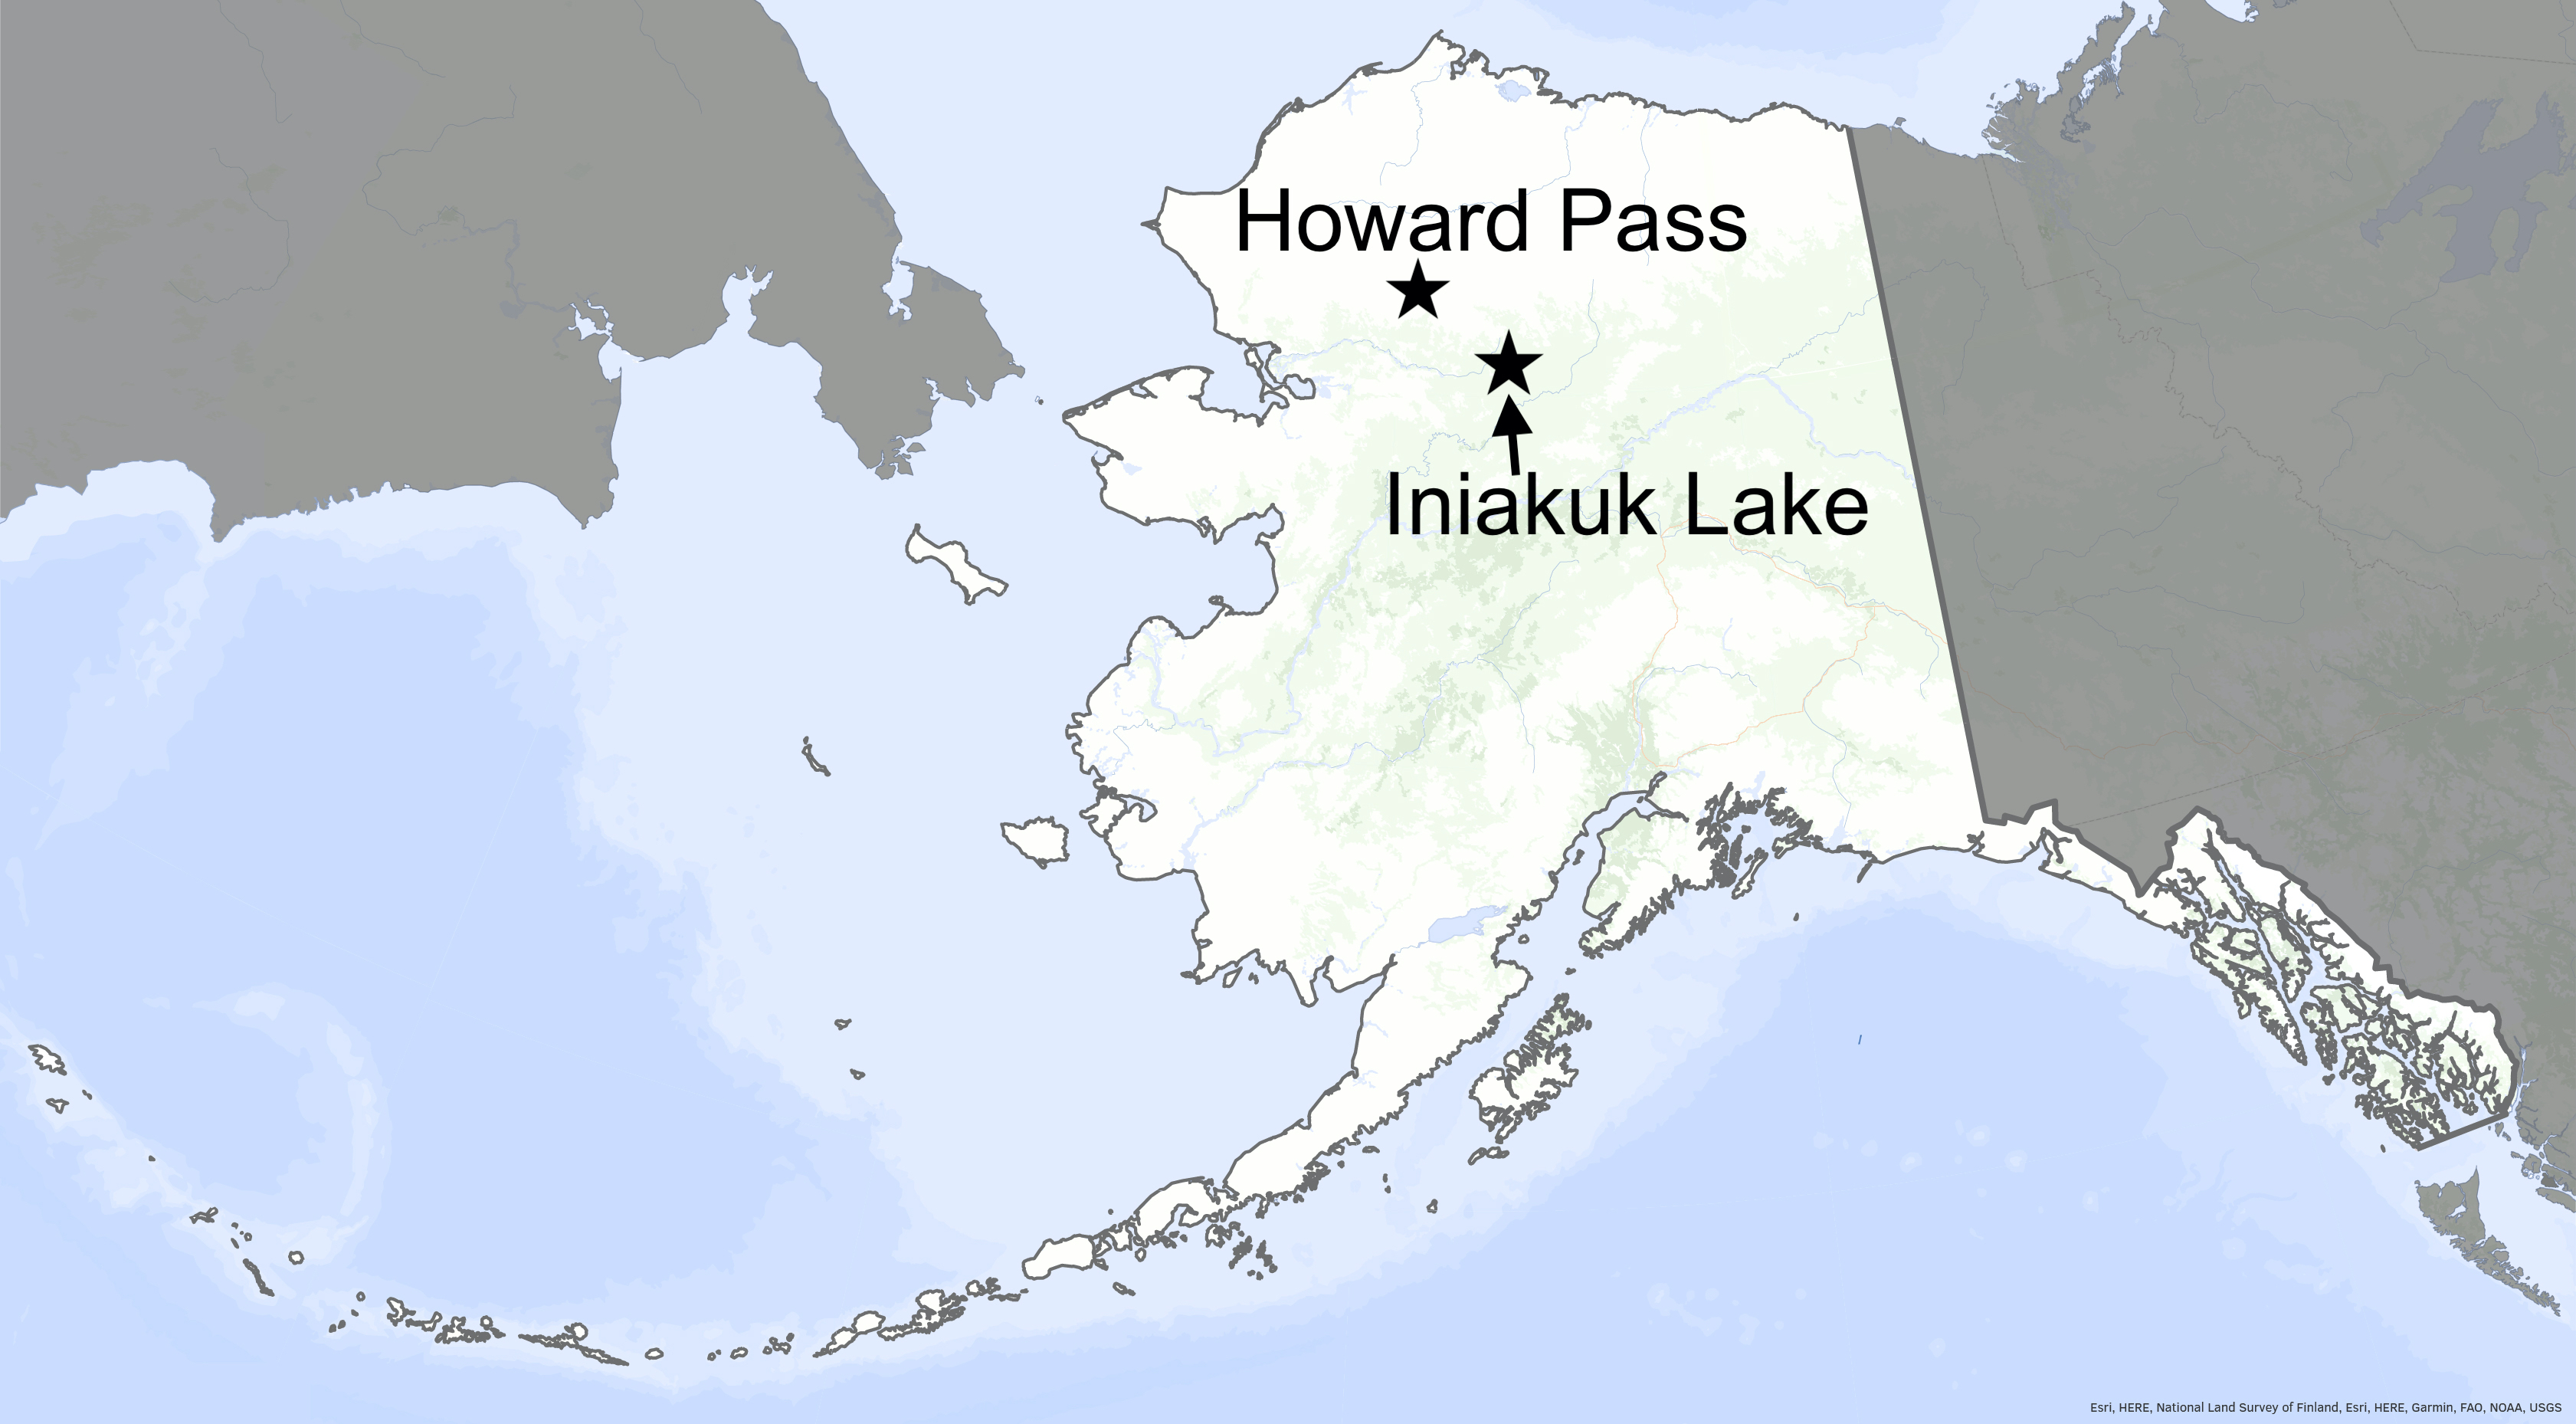 Stars on a map of Alaska show the locations of Howard Pass and Iniakuk Lake in the northcentral region.